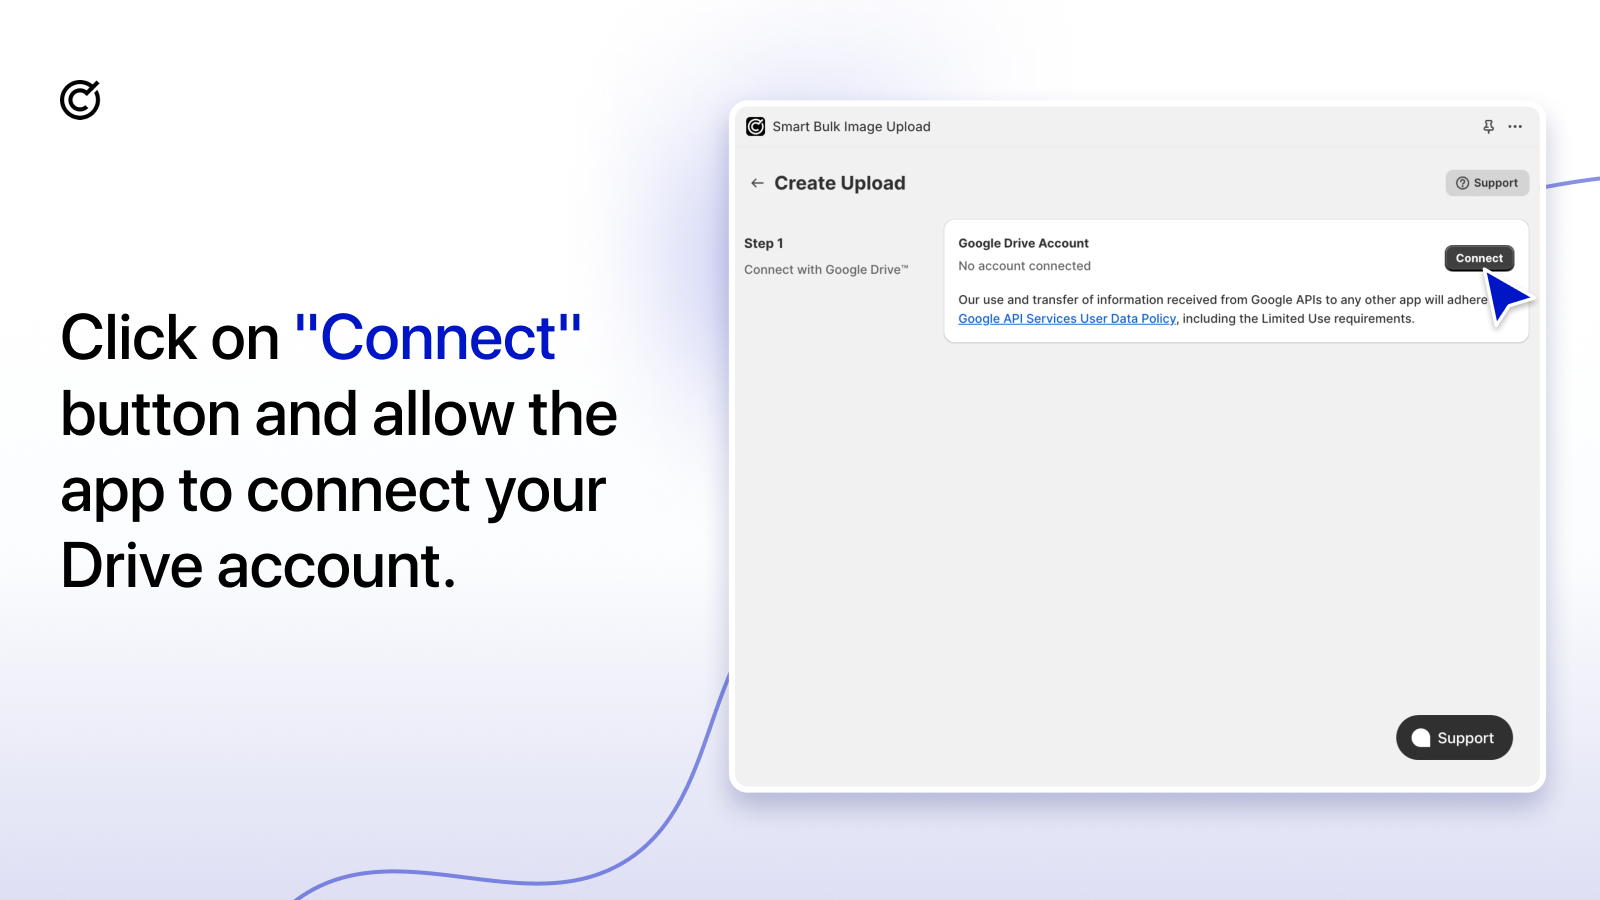 Step 2: Connect app to your Google Drive to reach product photos